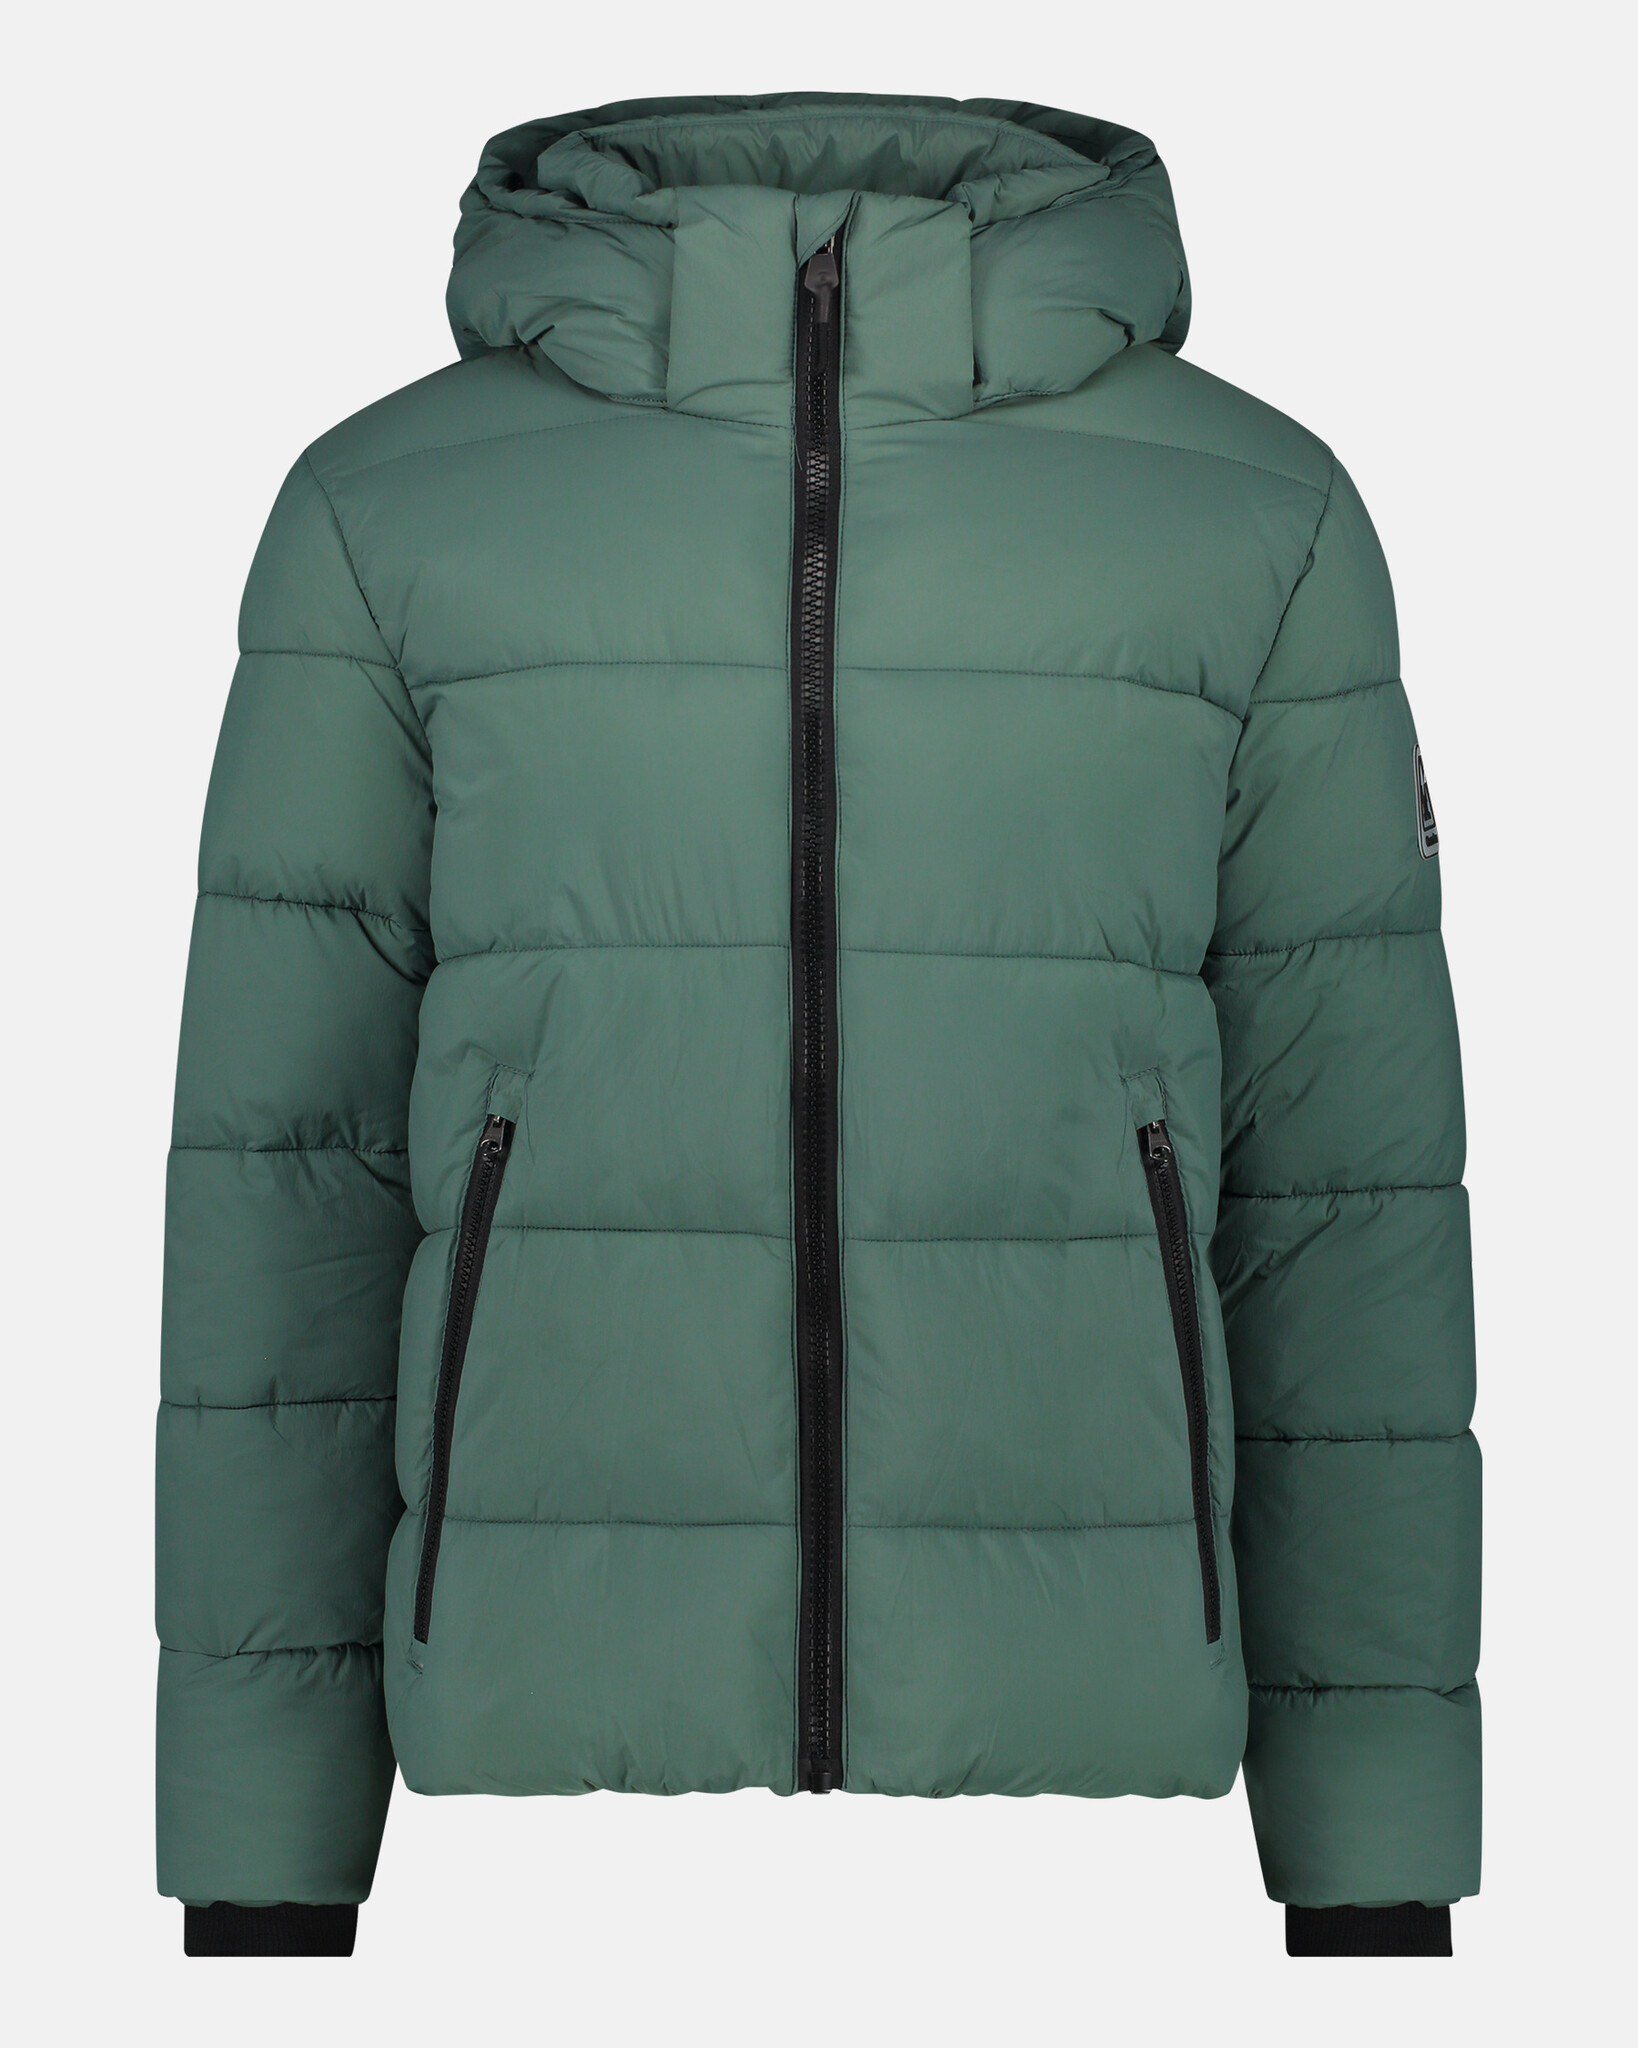 The On the Rocks REPREVE filled puffer jacket